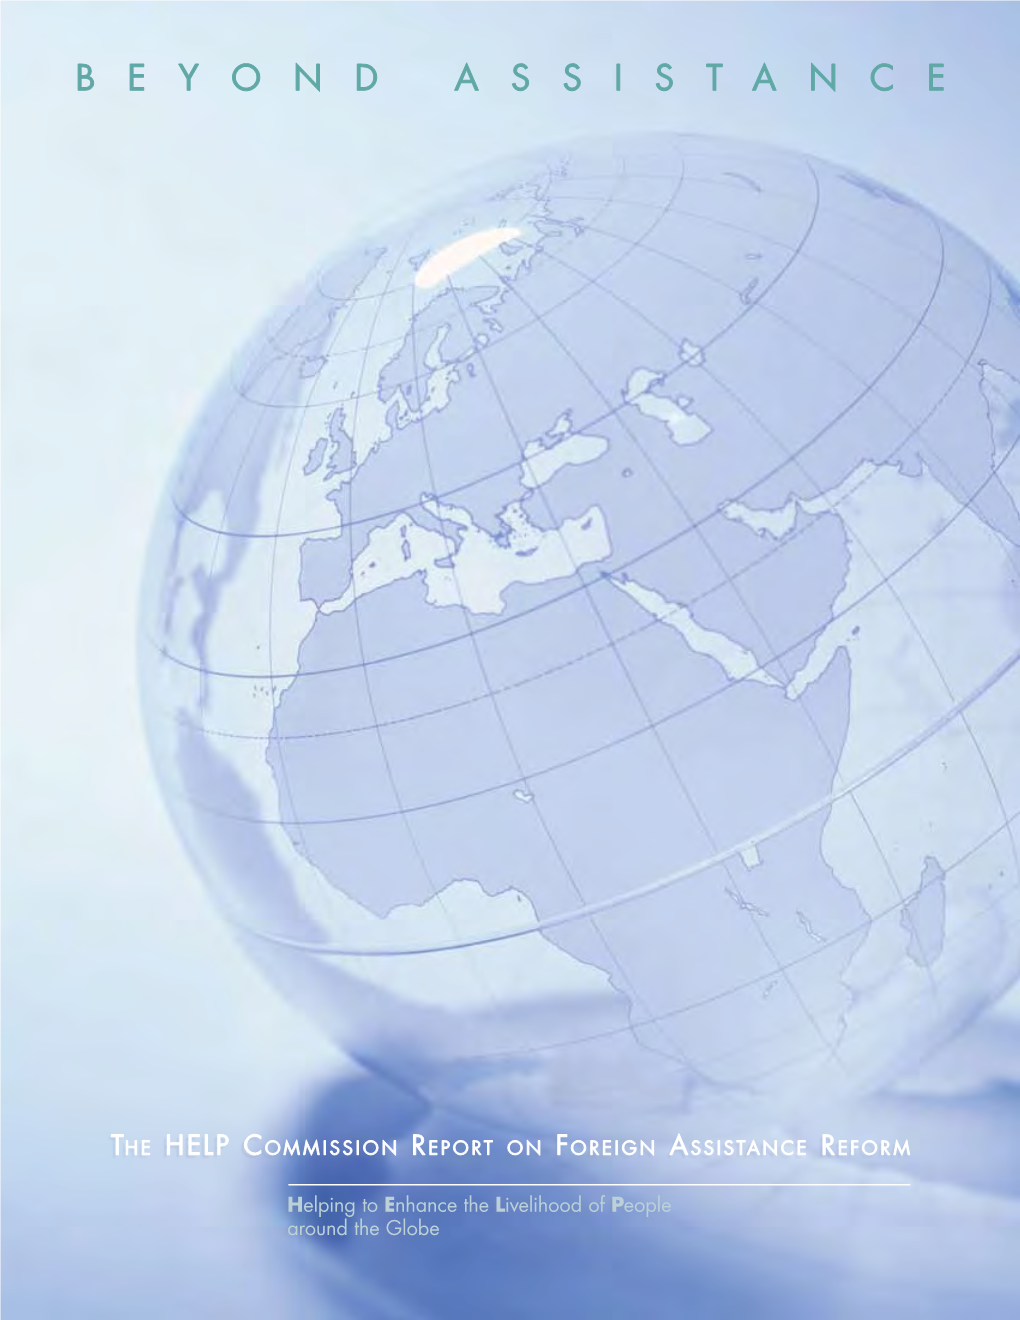 Beyond Assistance: the HELP Commission Report on Foreign